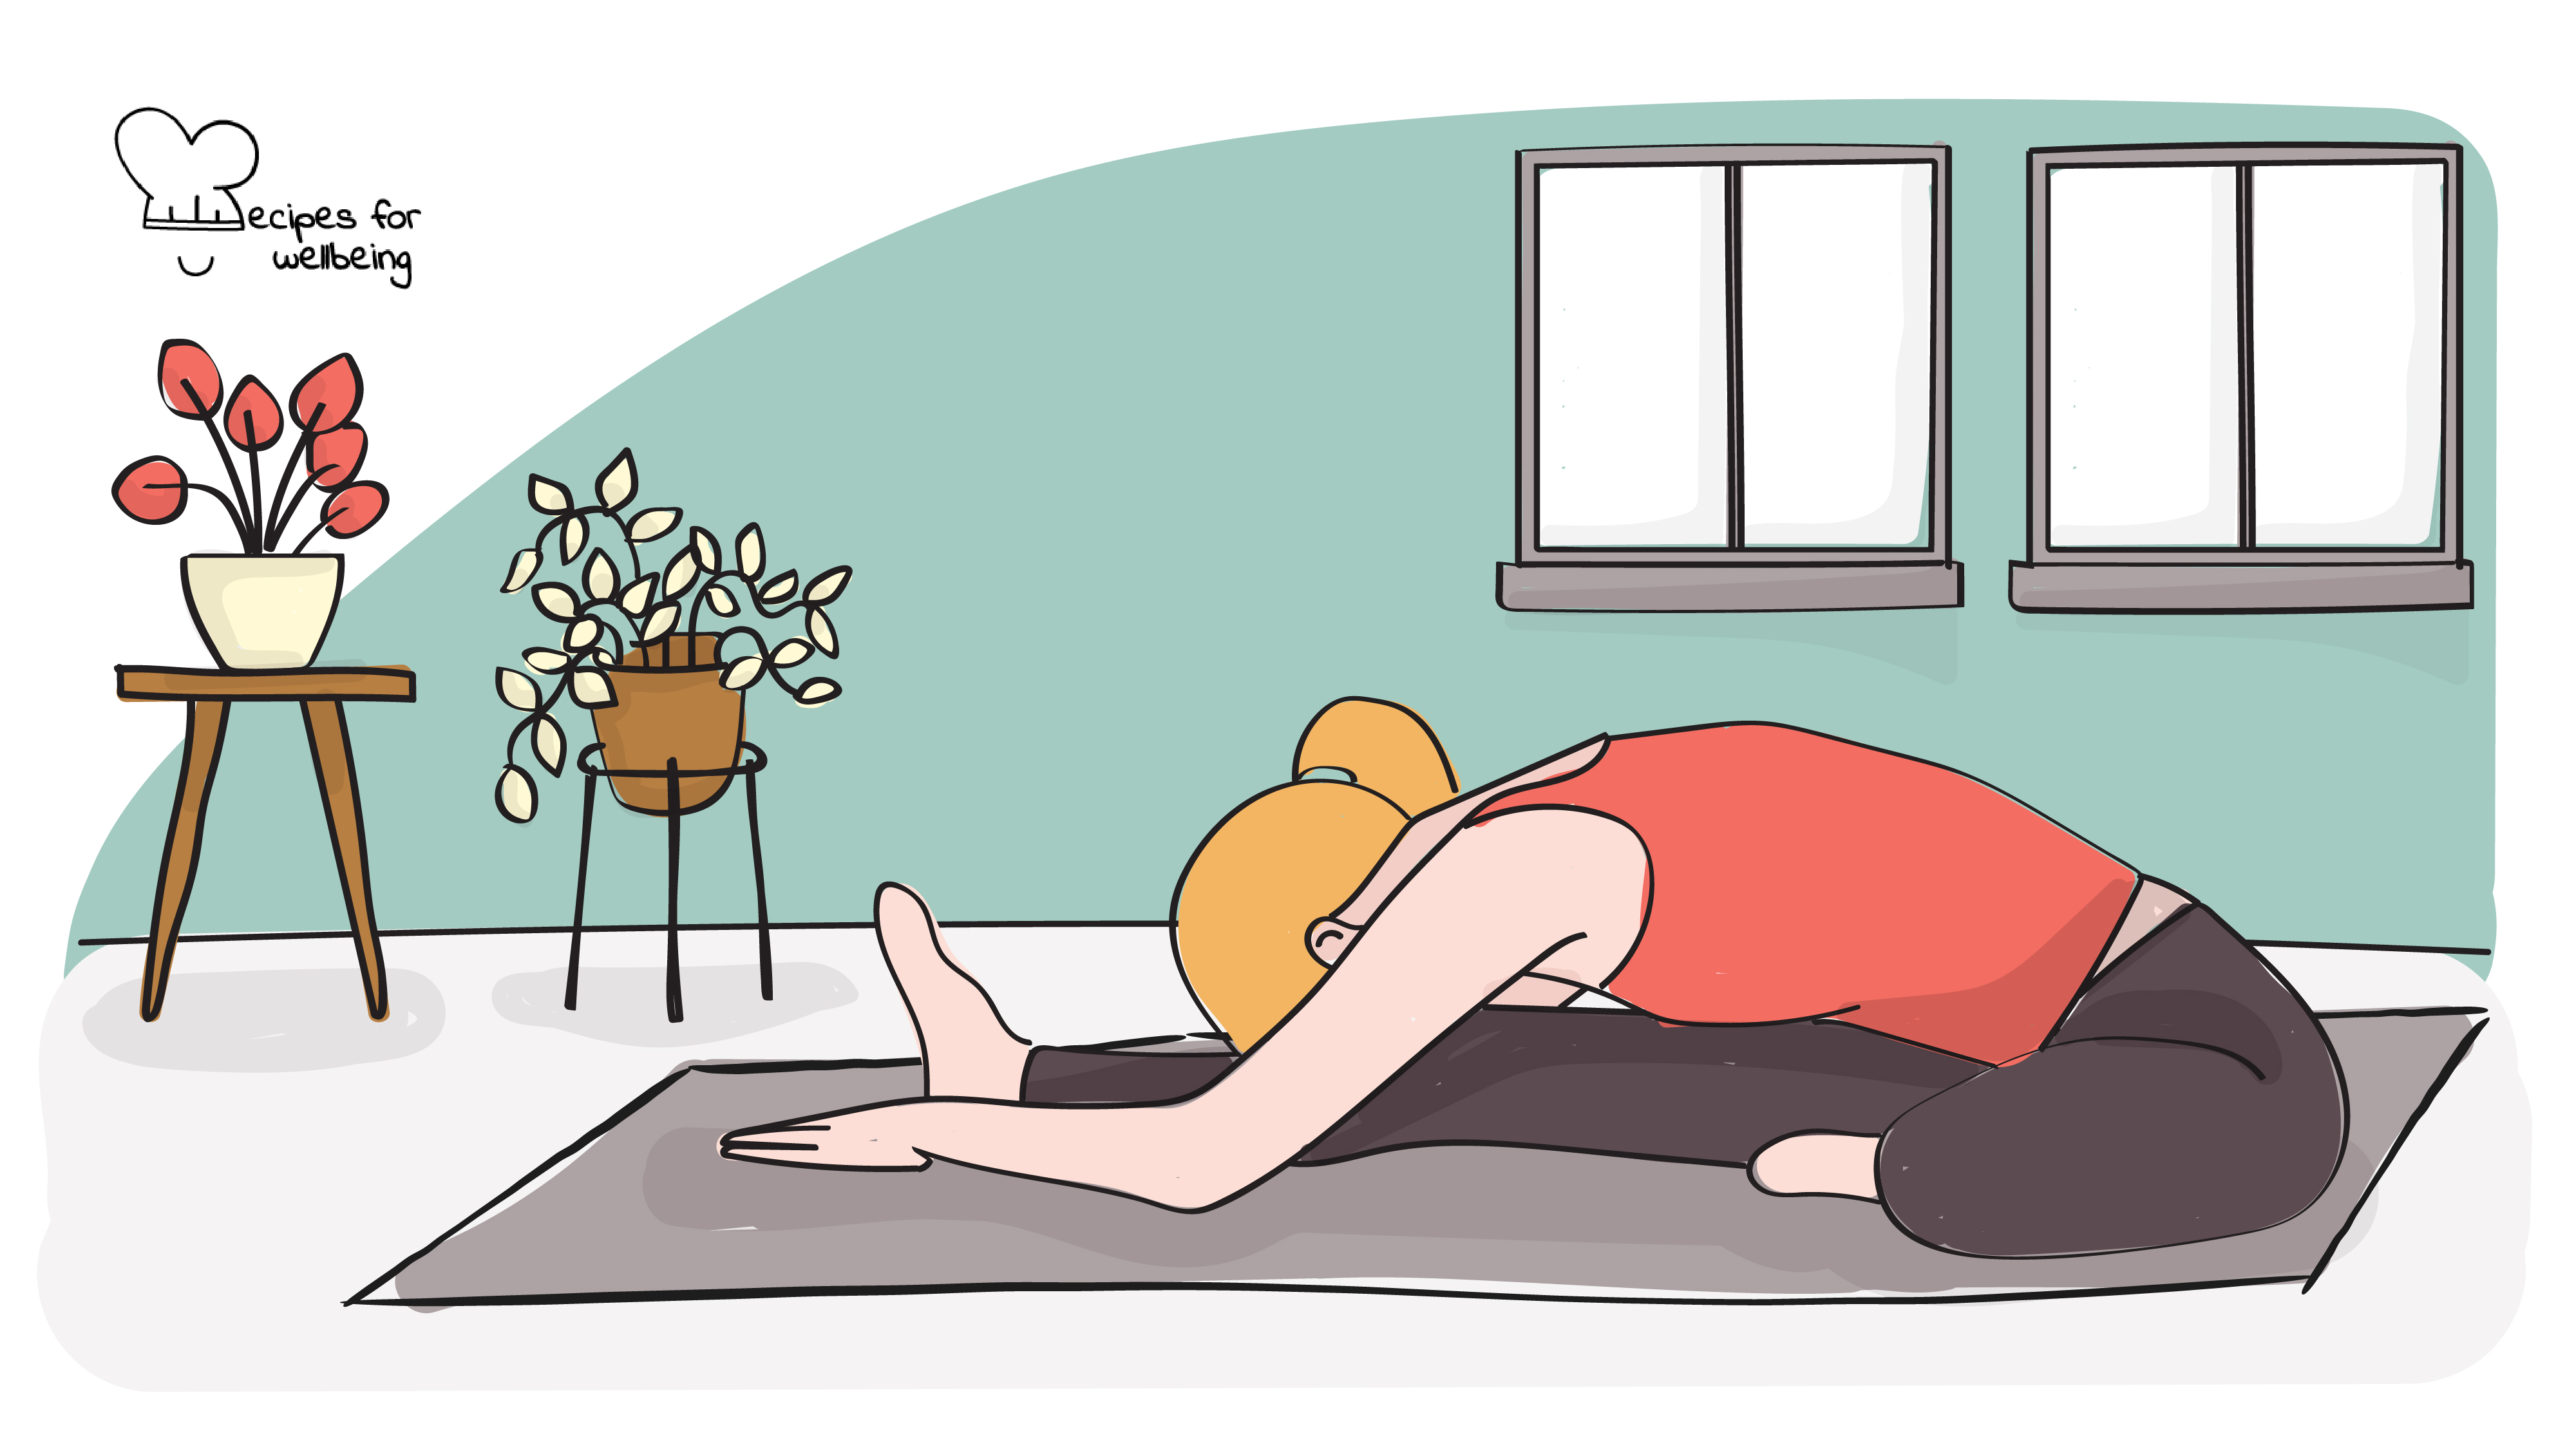 Illustration of a person in Janusirsasana. © Recipes for Wellbeing